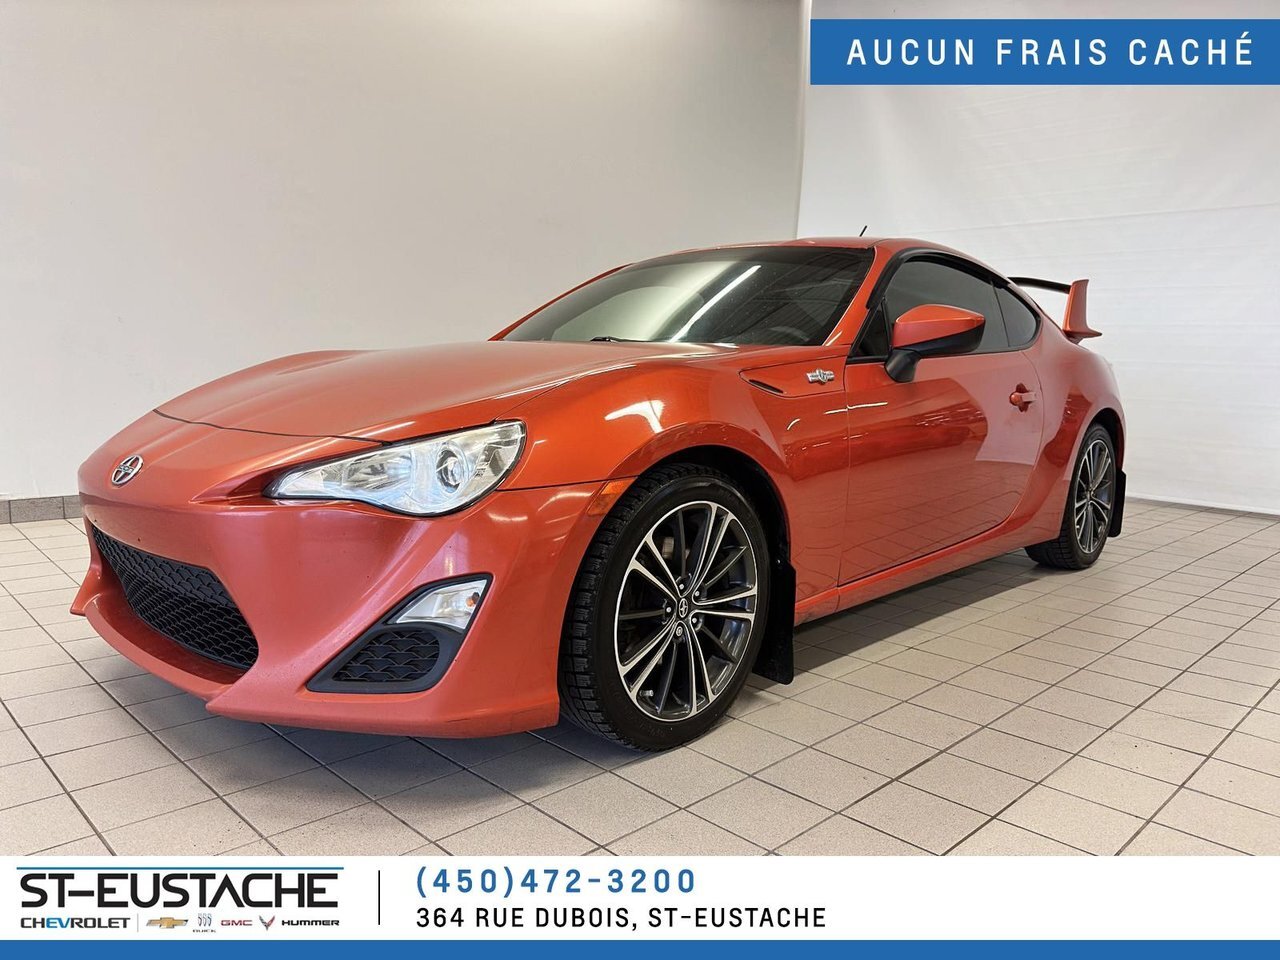 2014 Scion FR-S 2dr Coupe | CLIMATISATION | CRUISE CONTROL | MAG |